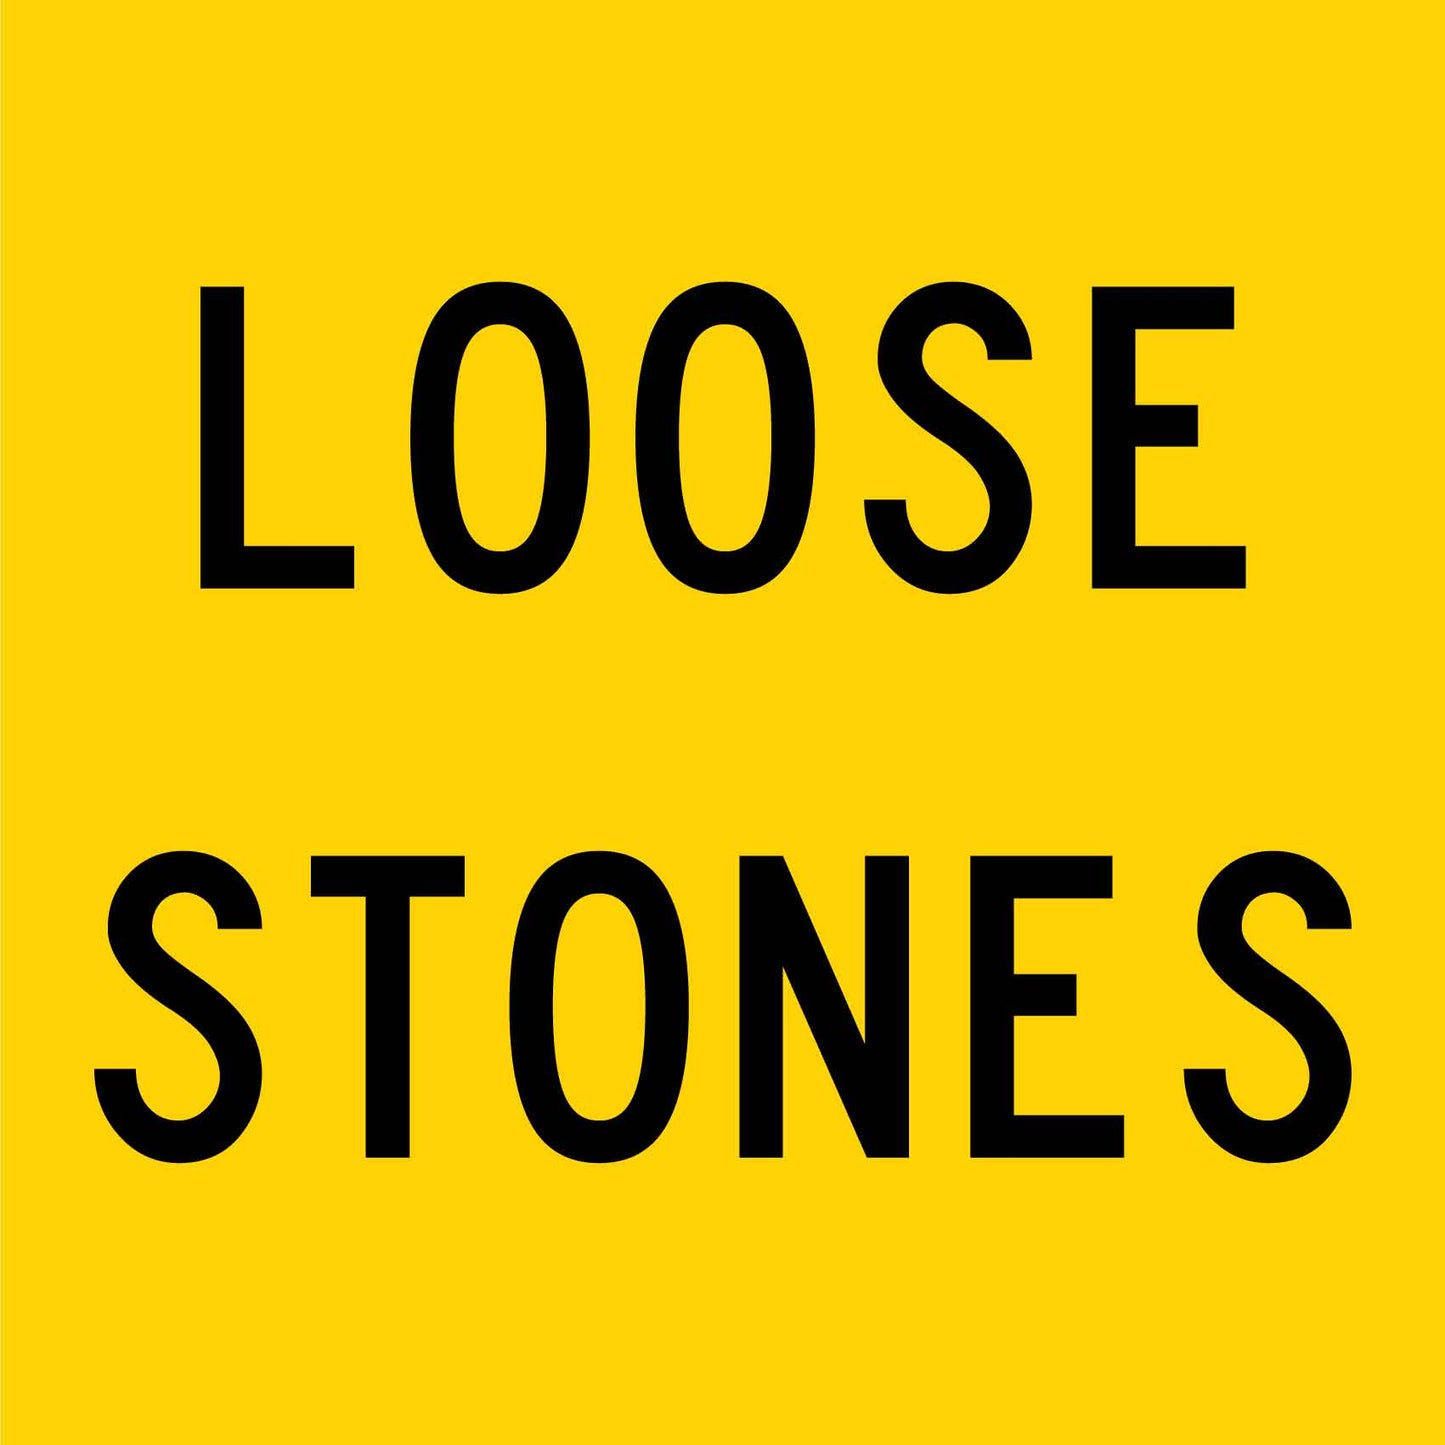 Loose Stones Multi Message Reflective Traffic Sign